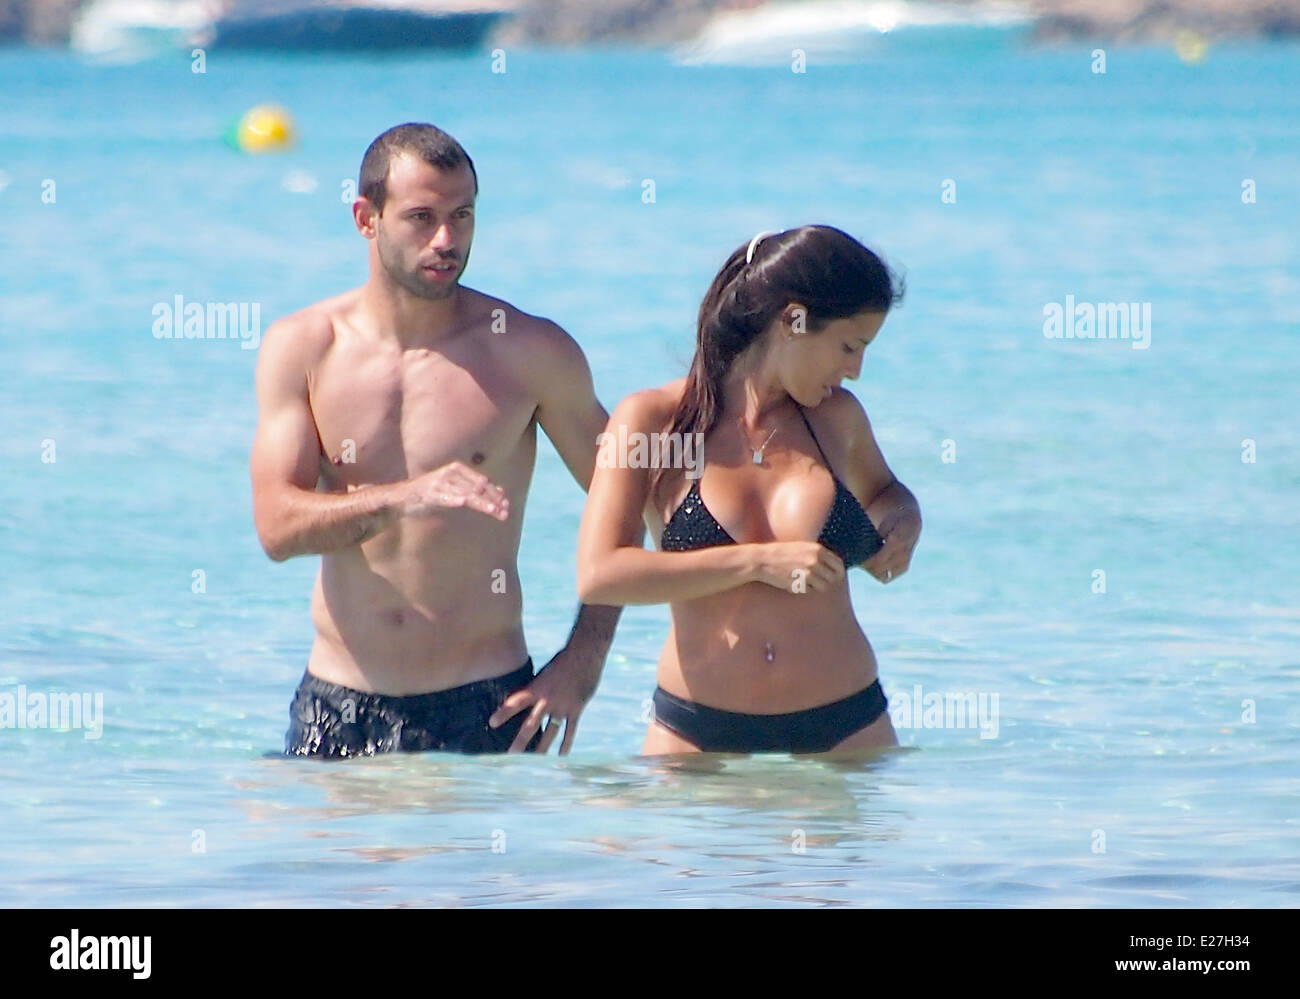 FC Barcelona midfielder Javier Mascherano spends time at the beach with his  wife and children while on holiday in Formentera Featuring: Javier  Mascherano,Fernanda Mascherano Where: Formentera, Balearic Islands, Spain  When: 22 Jun